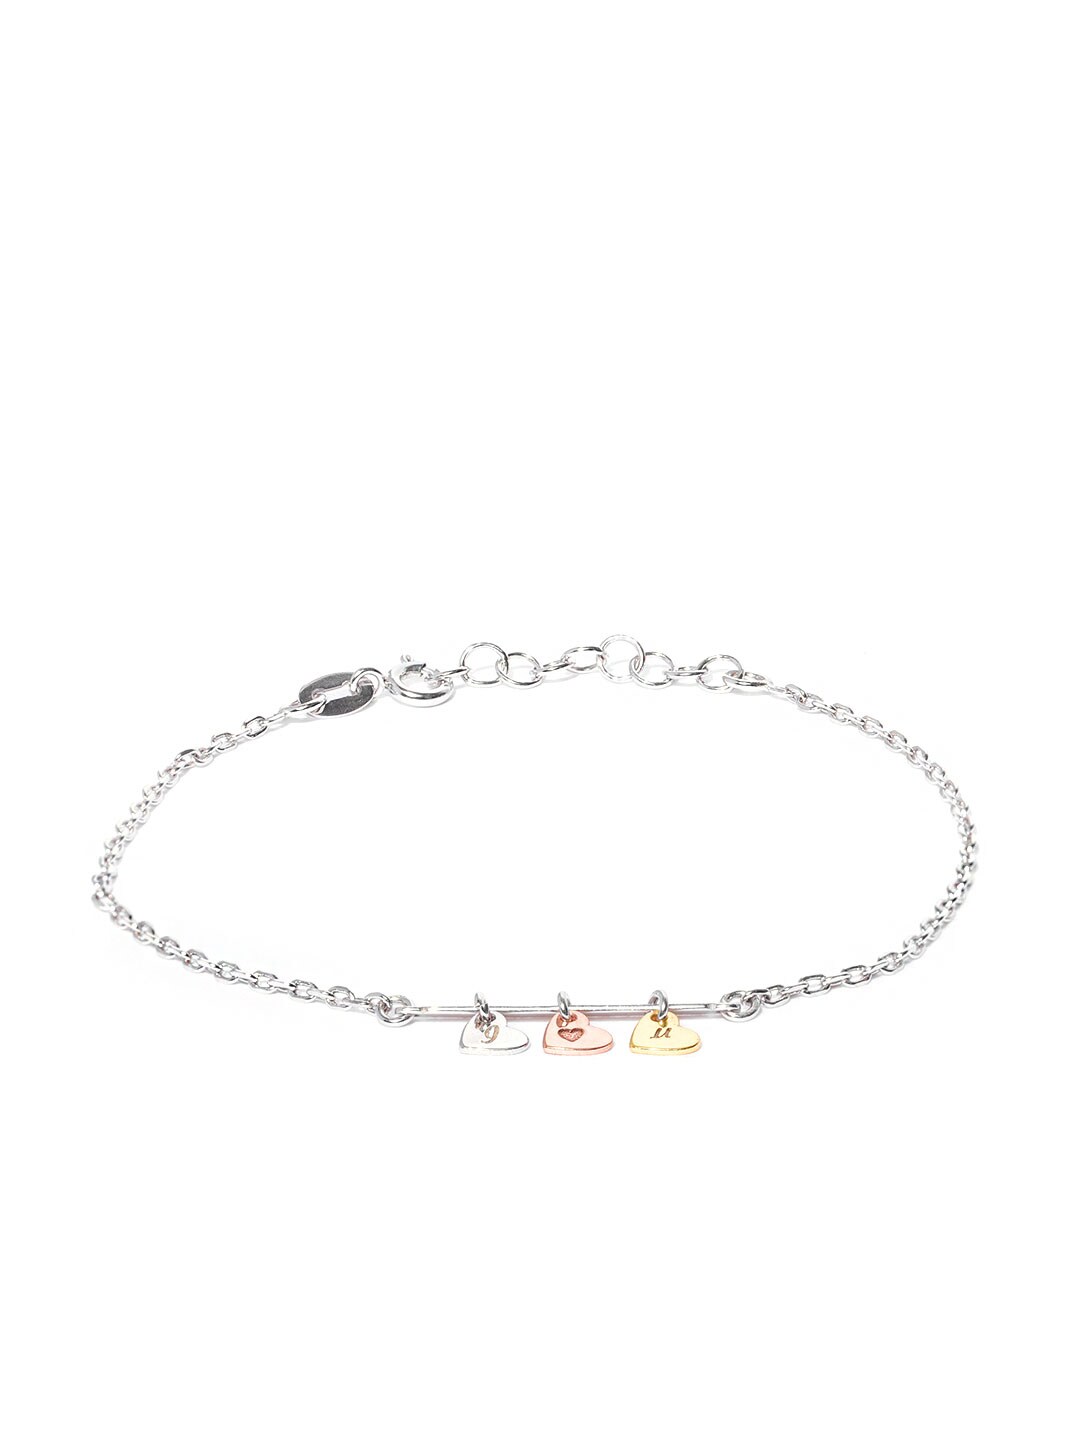 Carlton London Silver-Toned & Gold-Toned Rhodium-Plated Charm Bracelet Price in India